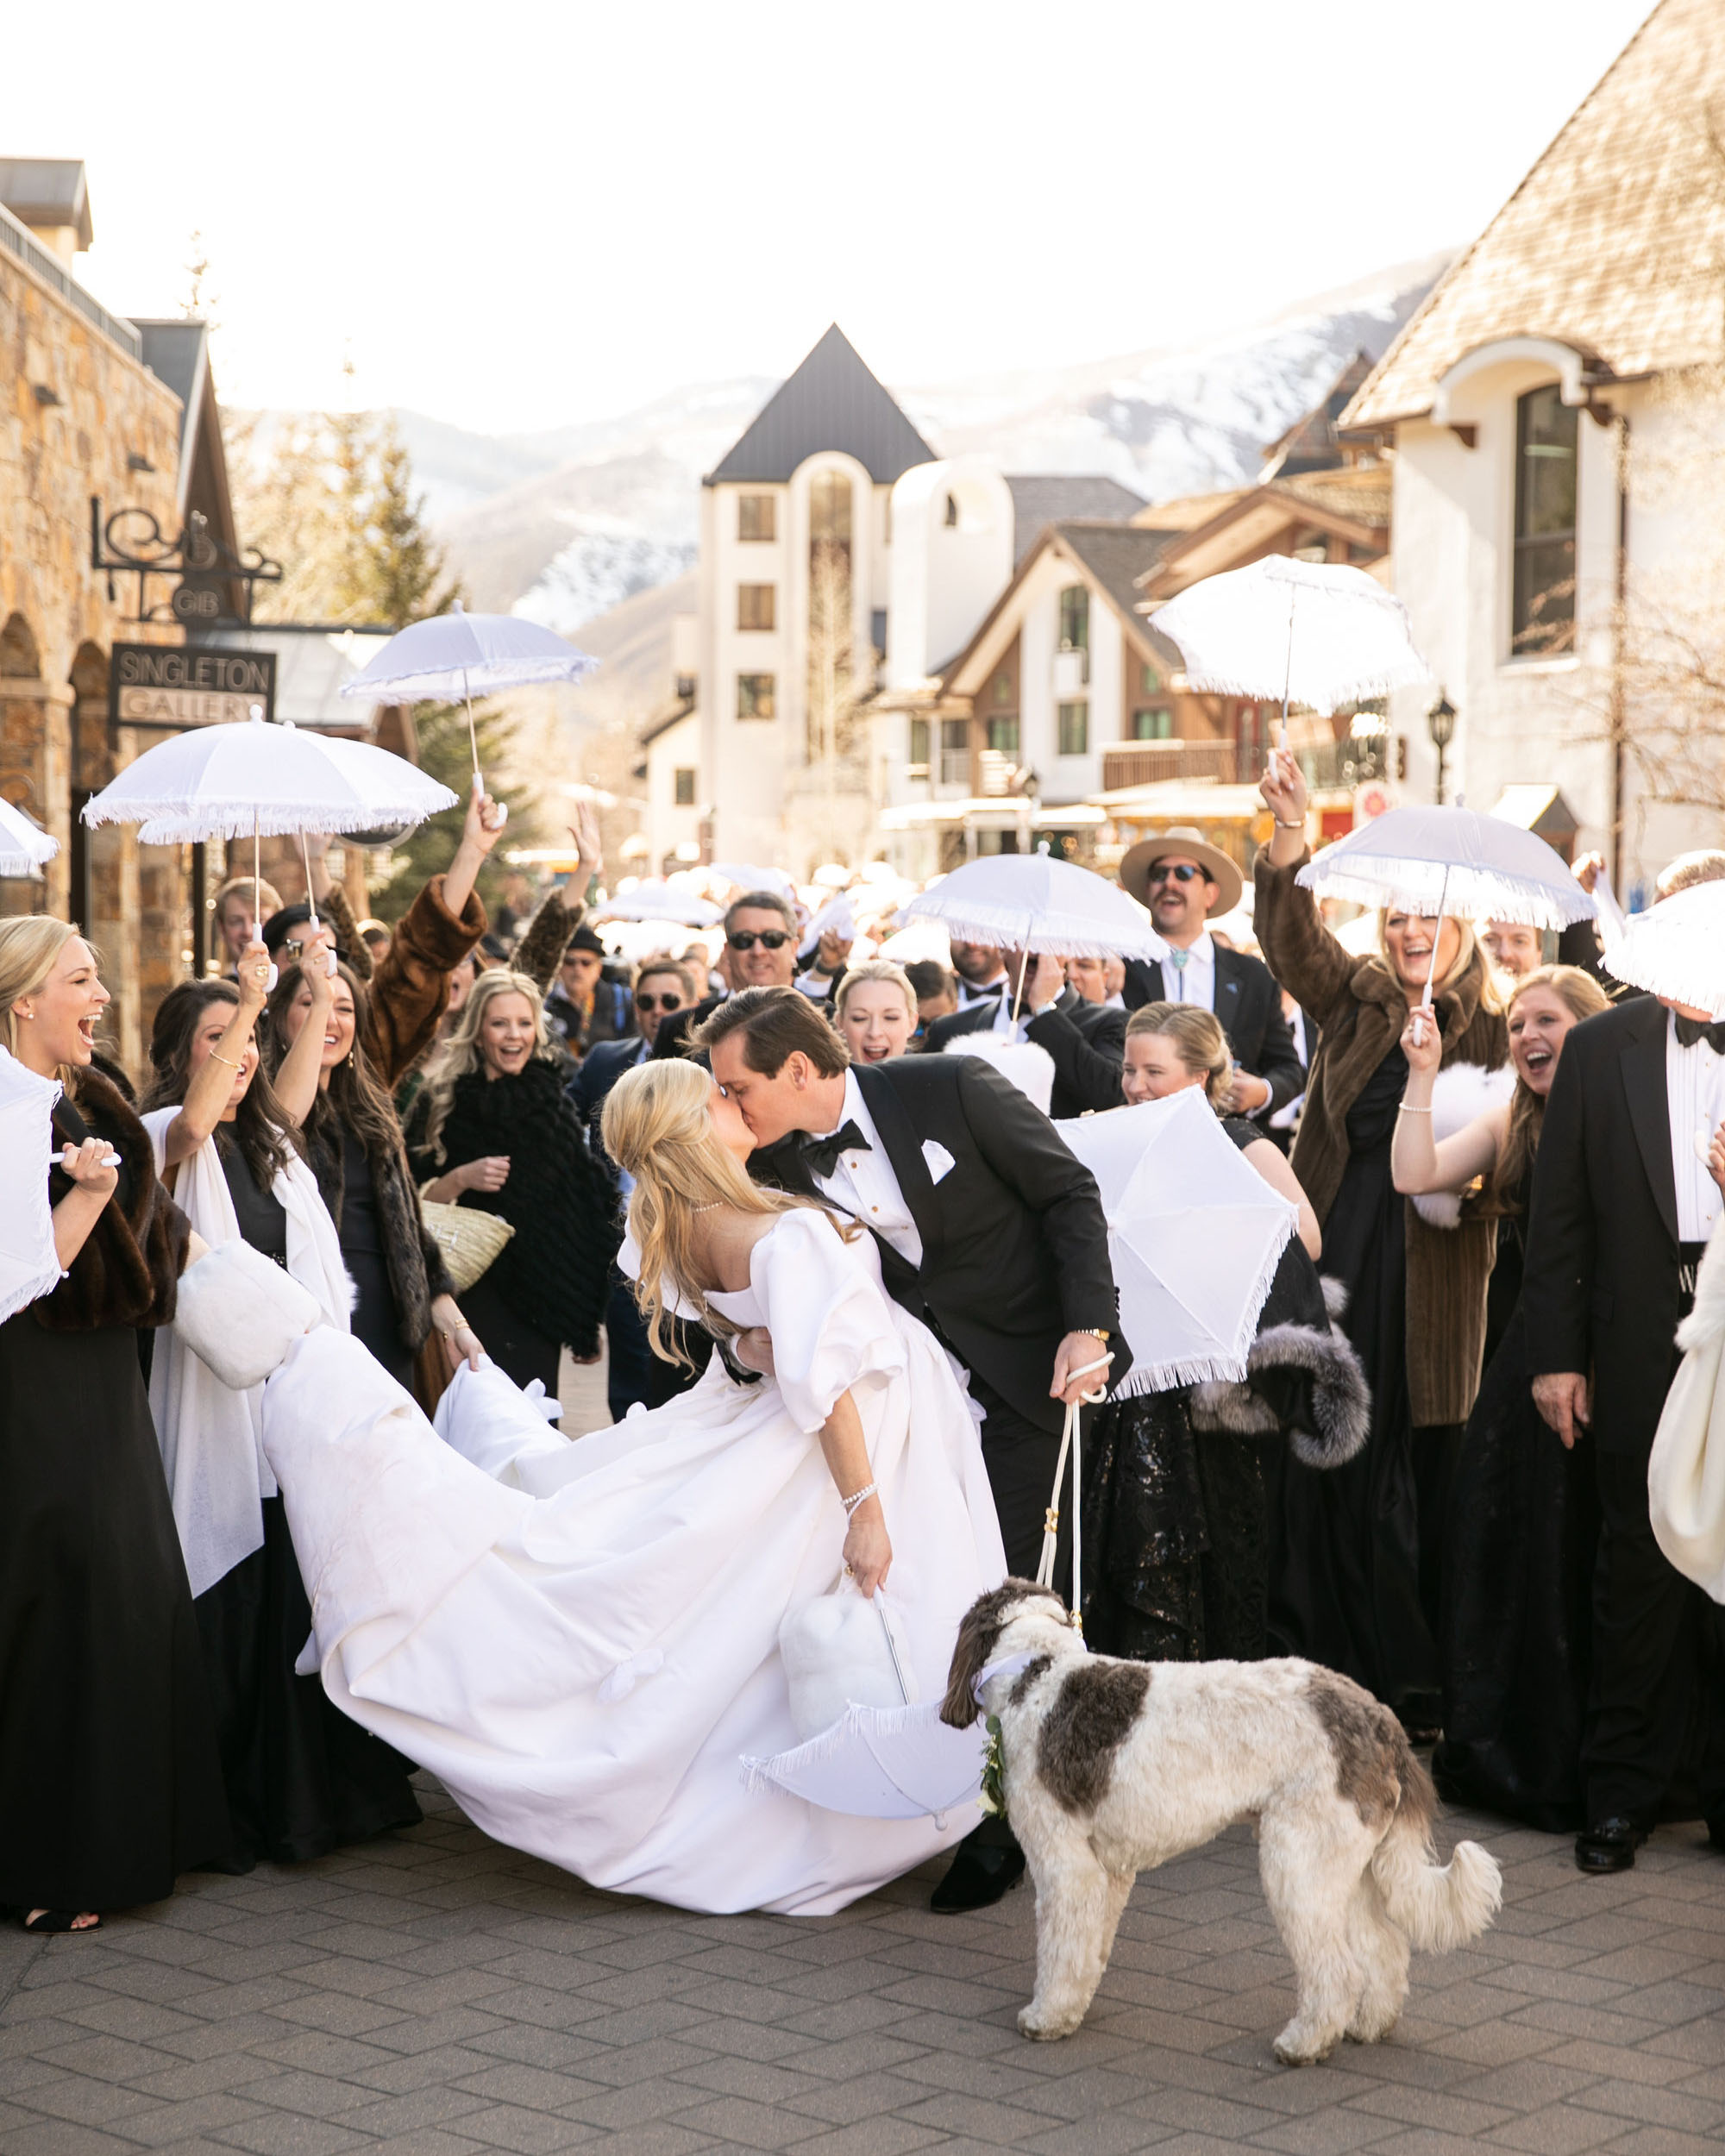 Vail Village Nuptials with the Connally’s